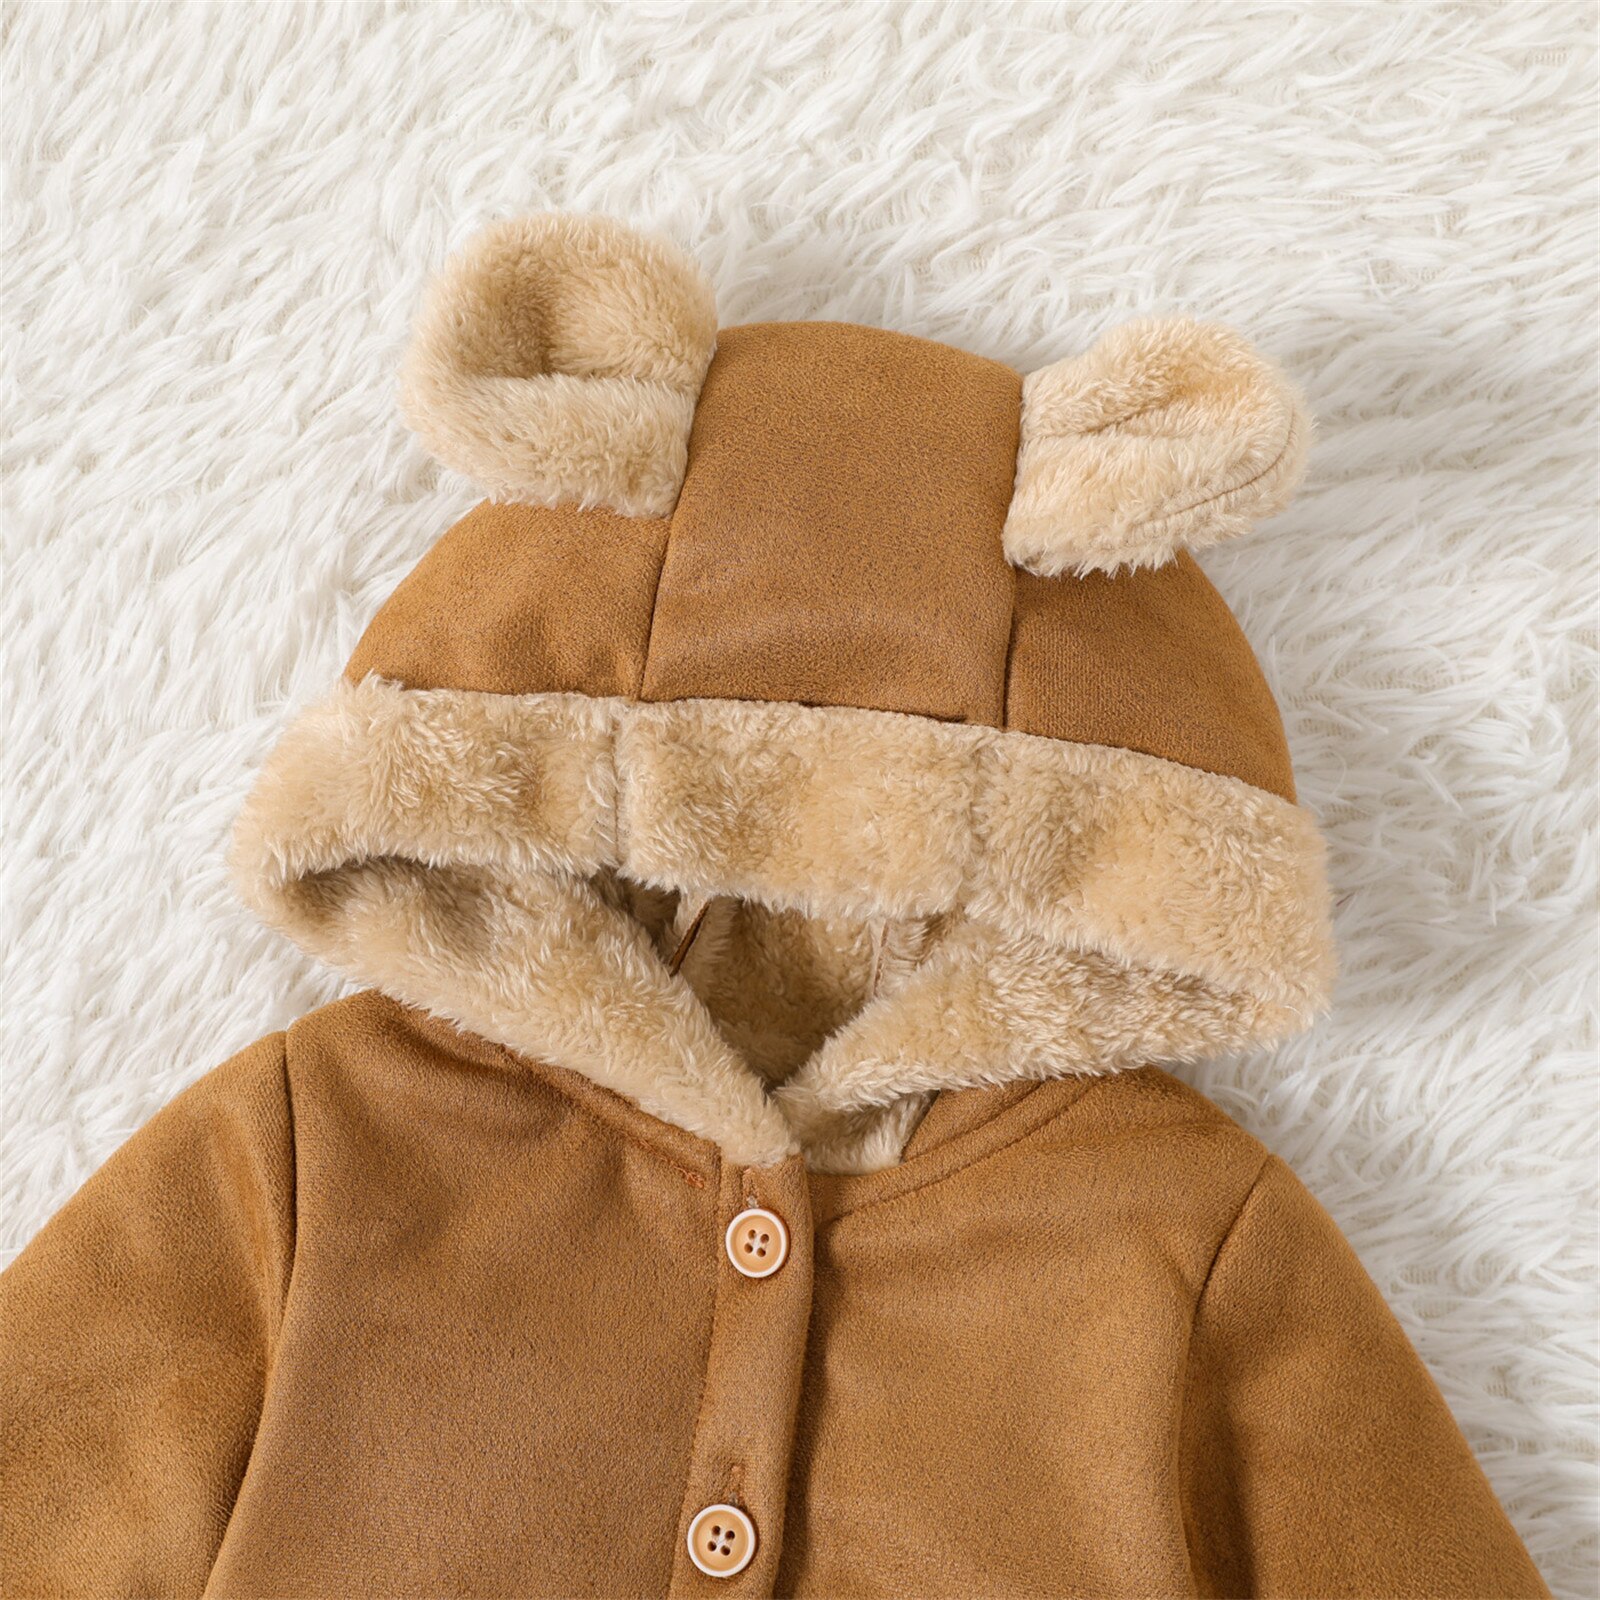 PatPat-Romper-Baby-Girl-Clothes-Jumpsuit-New-Born-Boy-Overalls-Infant-Newborn-Thickened-Thermal-Suede-Long-1